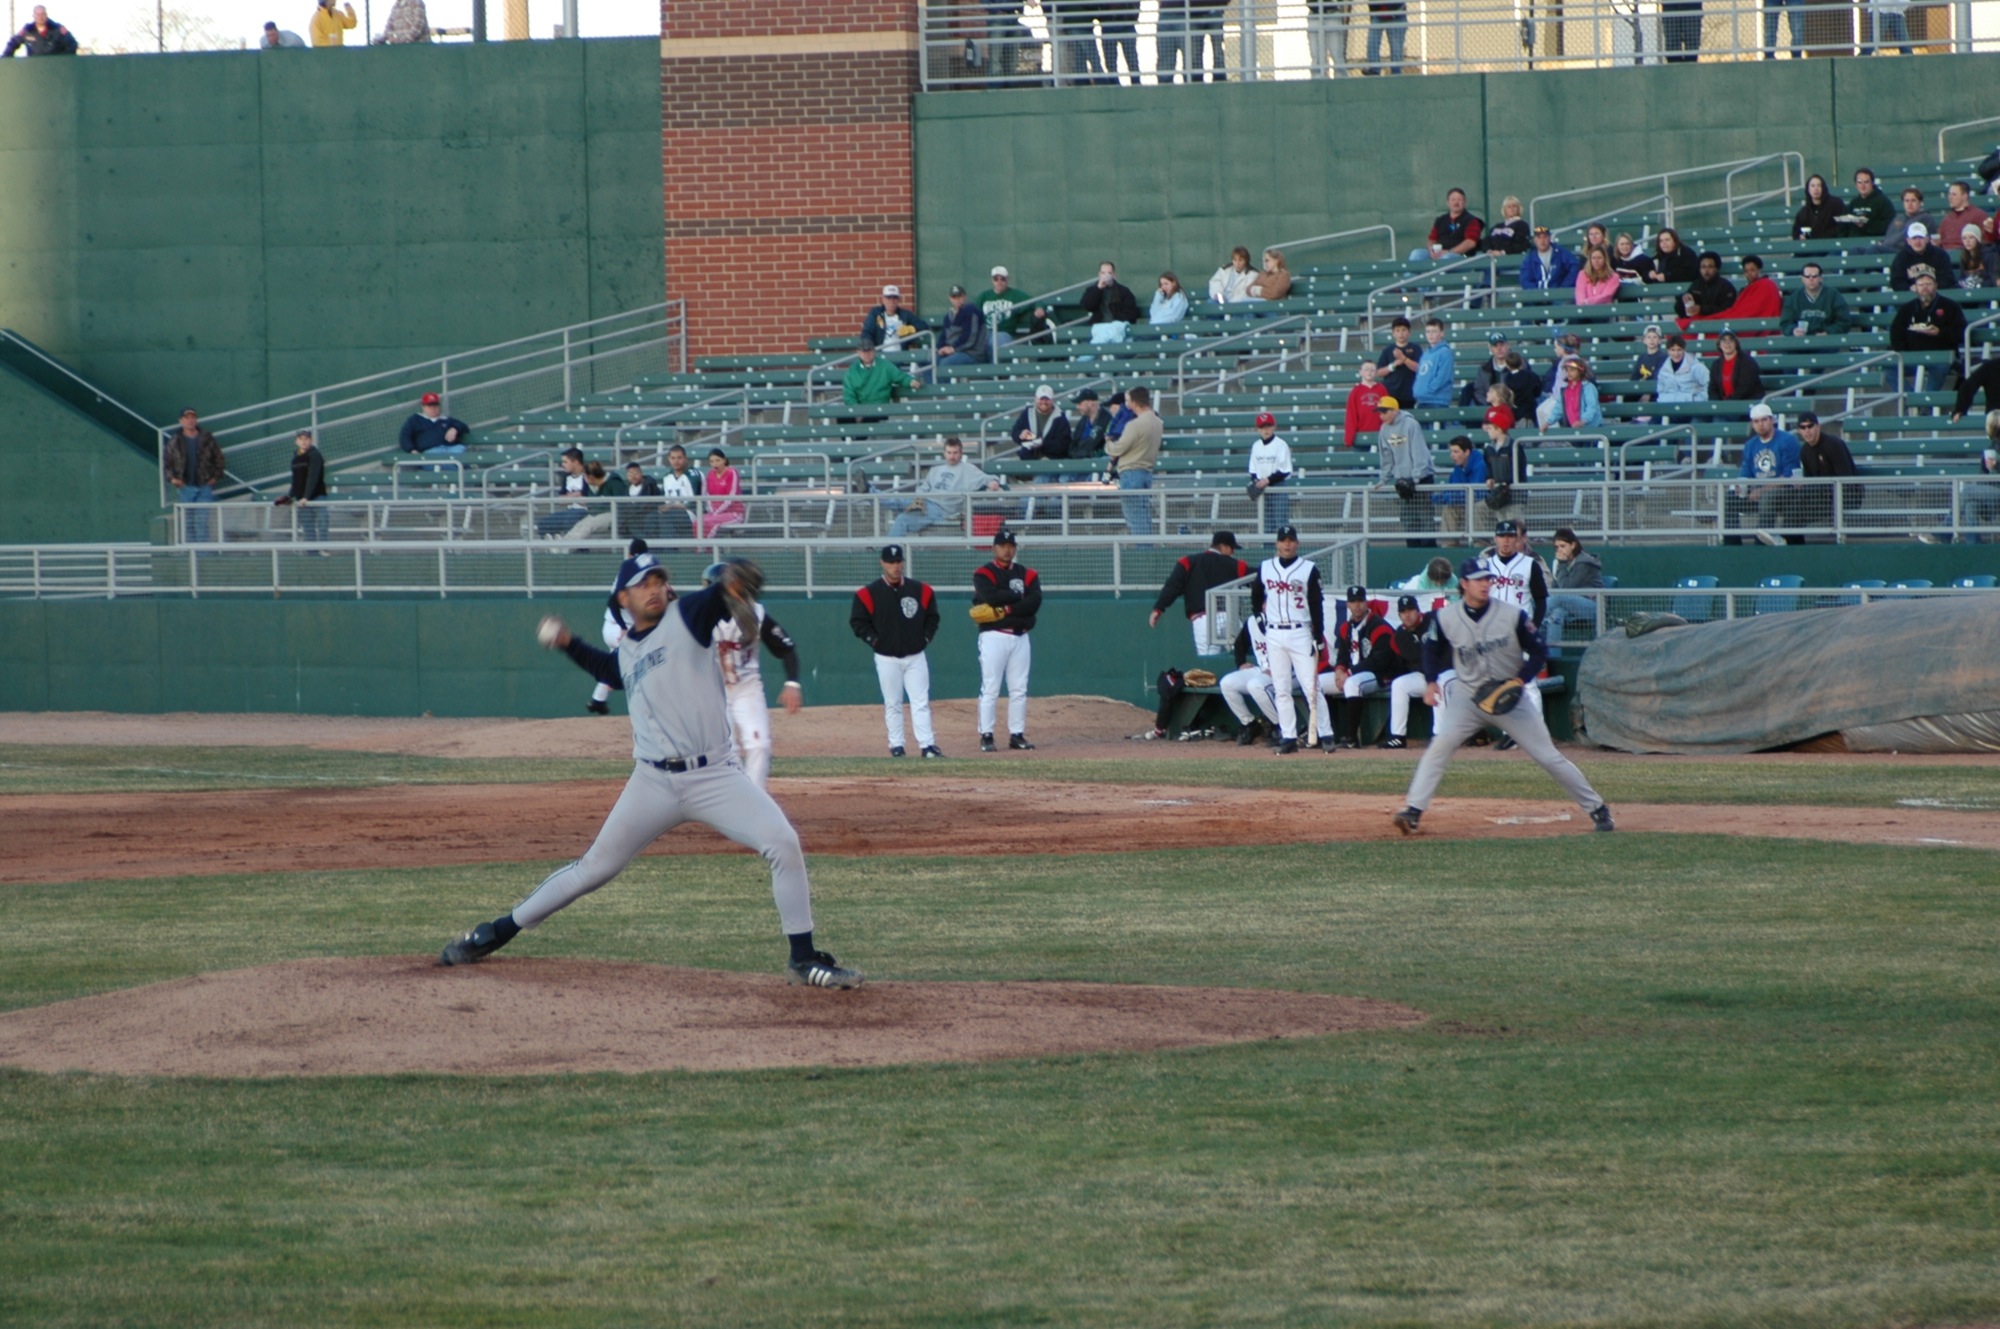 a pitcher throwing a ball to another player during a baseball game